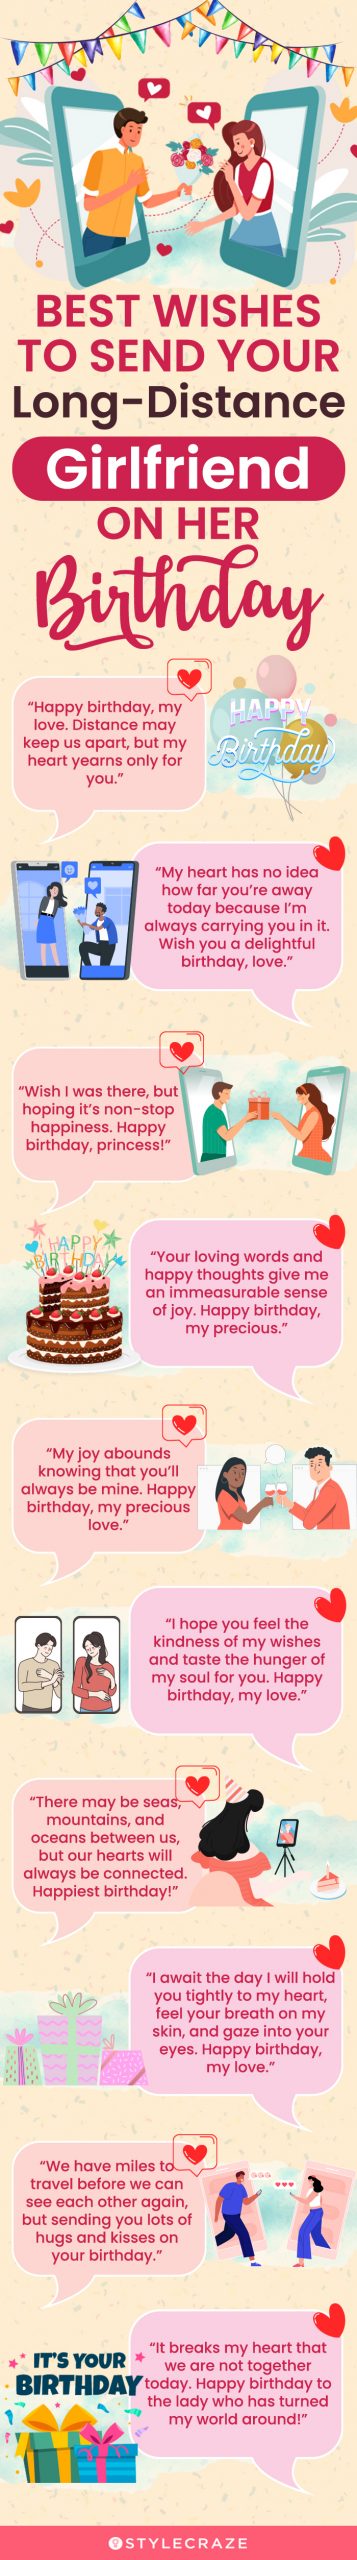 best wishes to send your long distance girlfriend on her birthday [infographic]